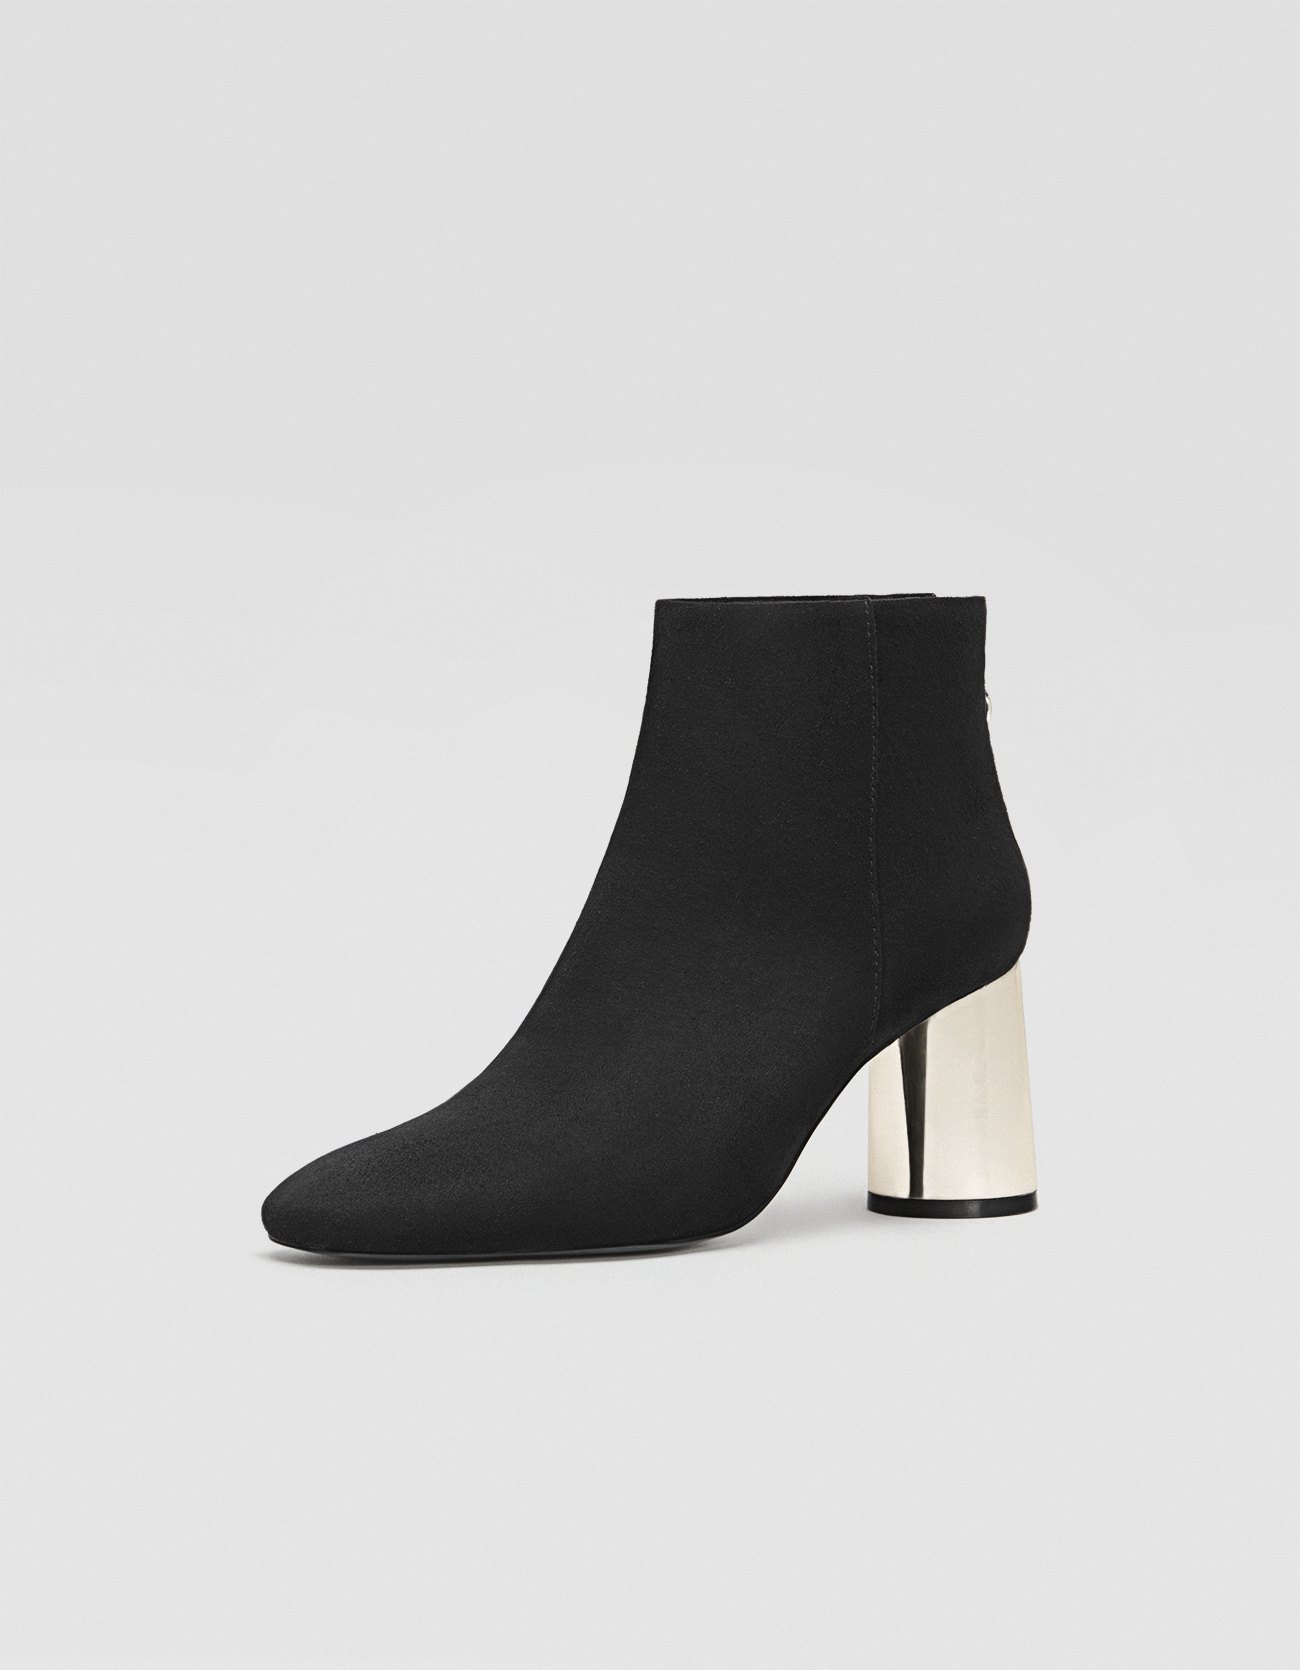 Stradivarius Ankle Boots With Metal Heel Piece In Black at £29.99 ...